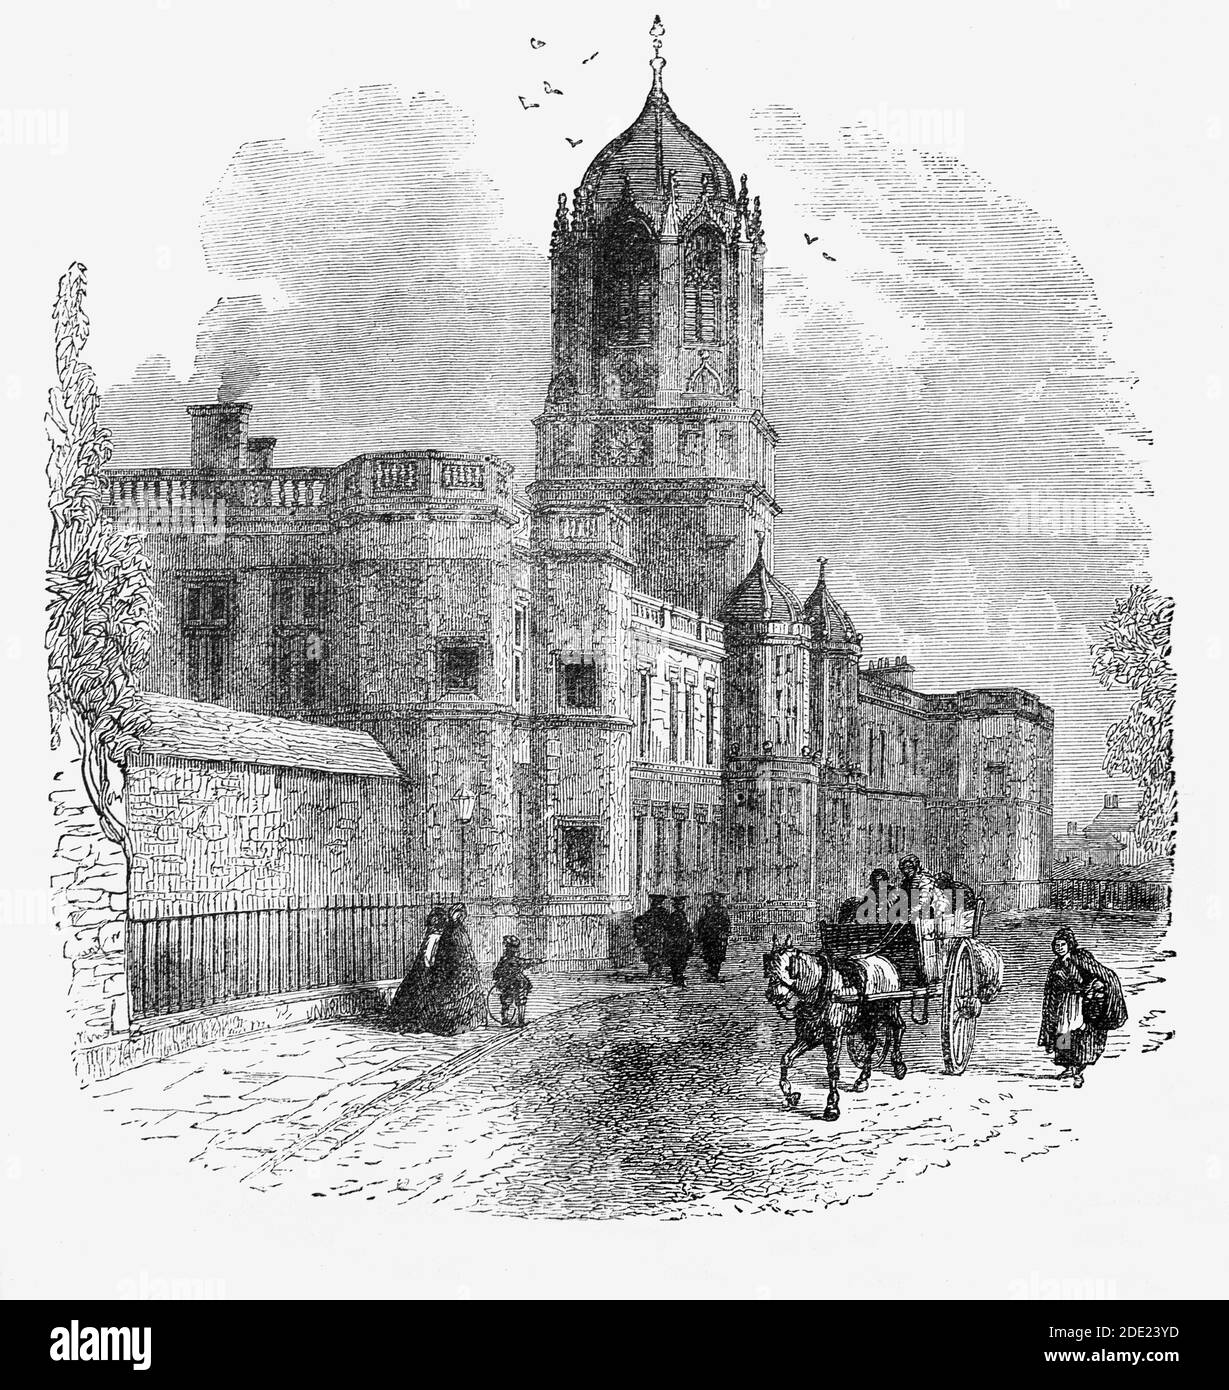 A 19th Century view of Christ Church college, the University of Oxford in England. Founded in 1546 by King Henry VIII, it is one of the larger colleges of the University and is also the wealthiest colleges. Christ Church has a number of architecturally significant buildings including Tom Tower (designed by Sir Christopher Wren), Tom Quad (the largest quadrangle in Oxford), and the Great Dining Hall which was also the seat of the parliament assembled by King Charles I during the English Civil War. Stock Photo